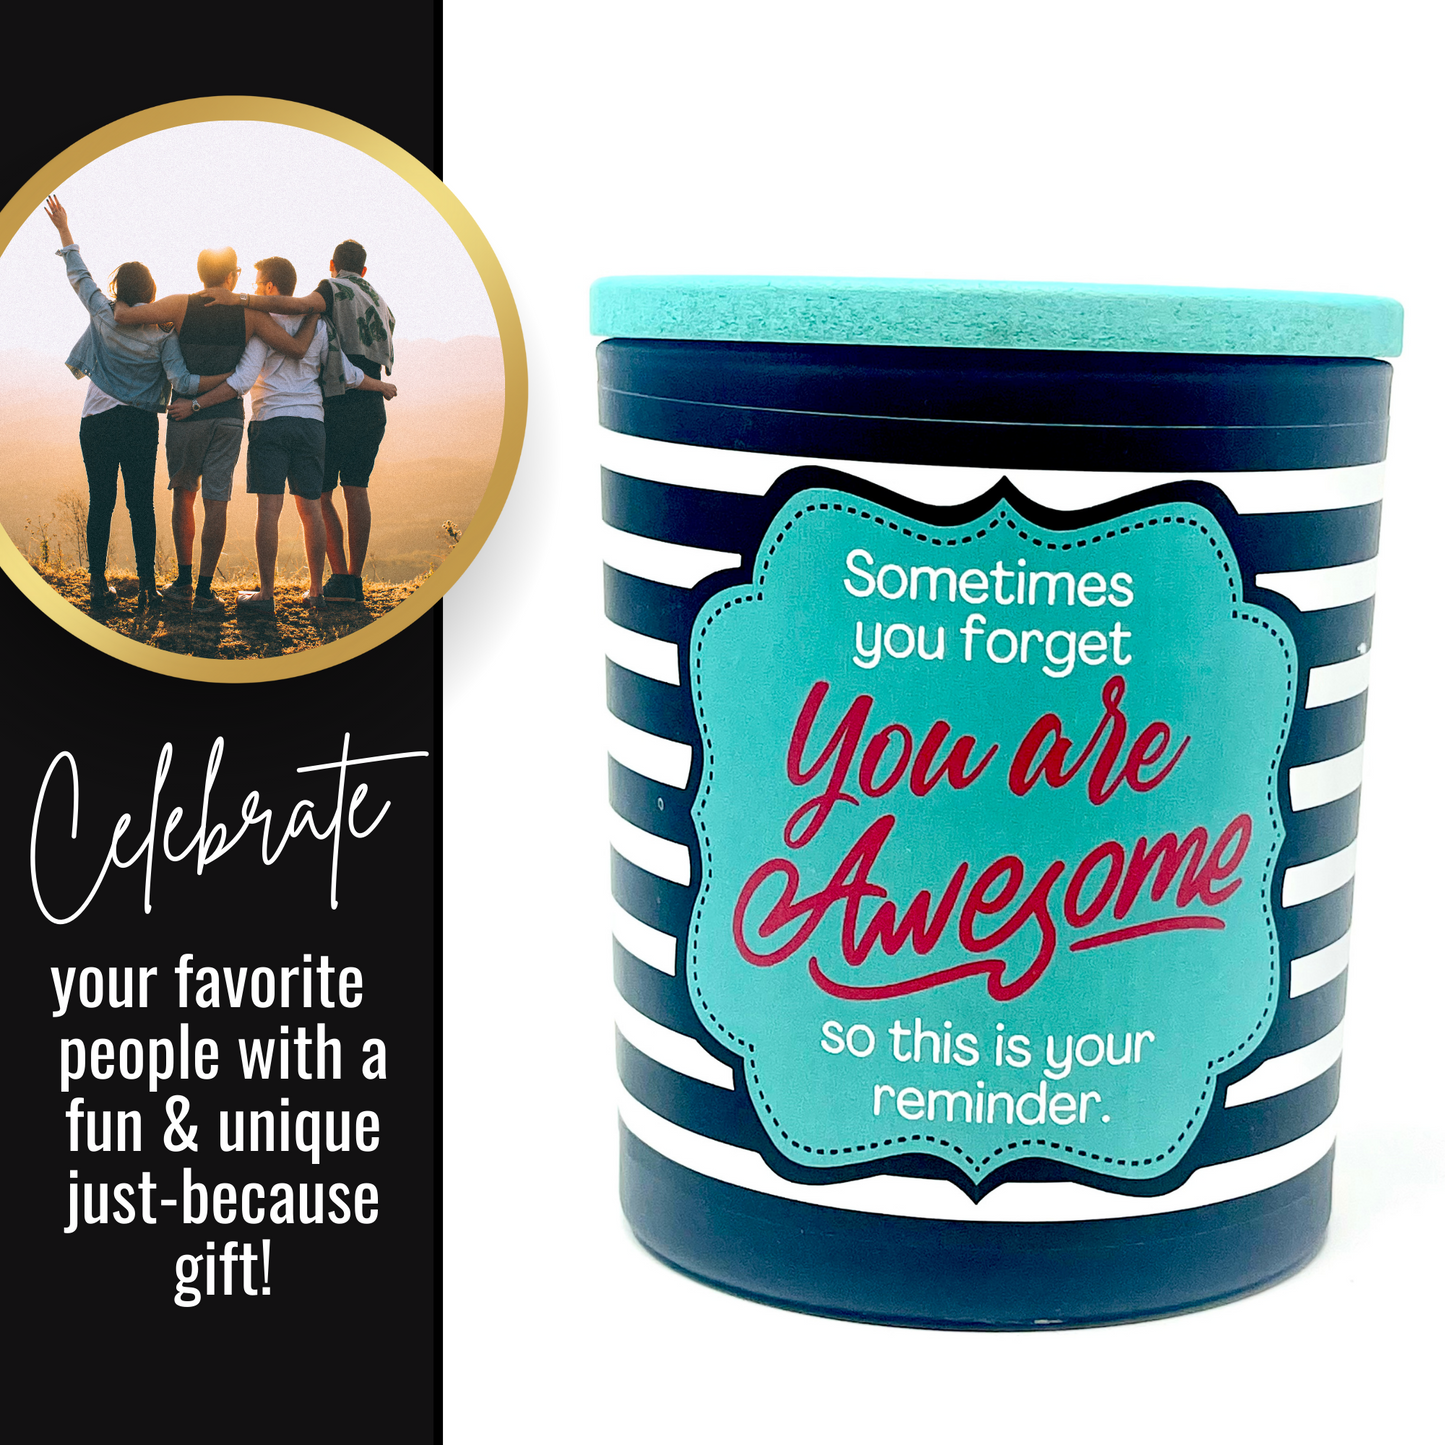 You are Awesome 8 oz Jasmine and Vanilla Scented Candle